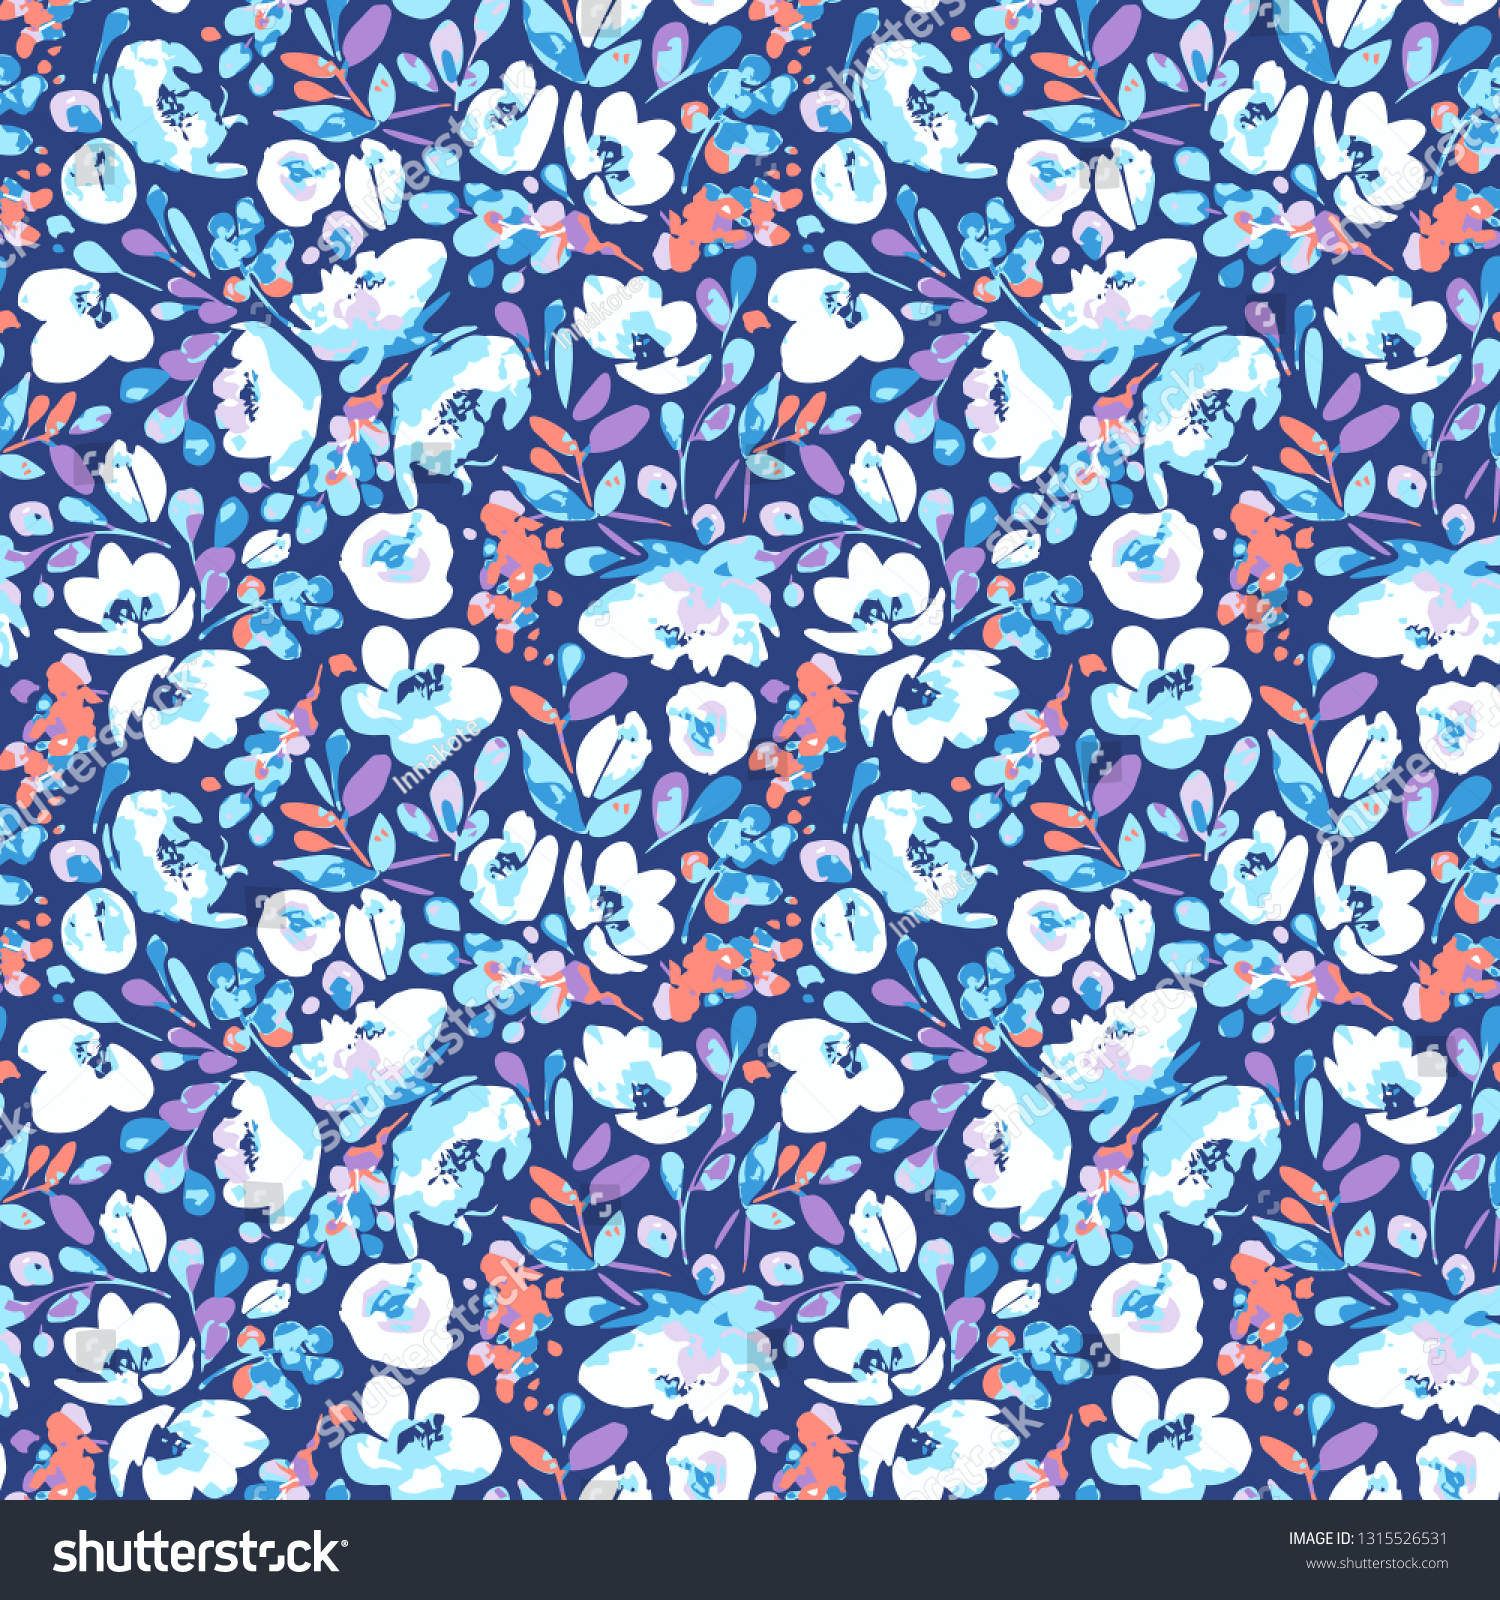 SVG of Vector seamless pattern, blooming absract white, blue flowers and violet, coral foliage. Illustration with floral  shapes and spots on navy background. Use in textiles, interior, wrapping paper. svg